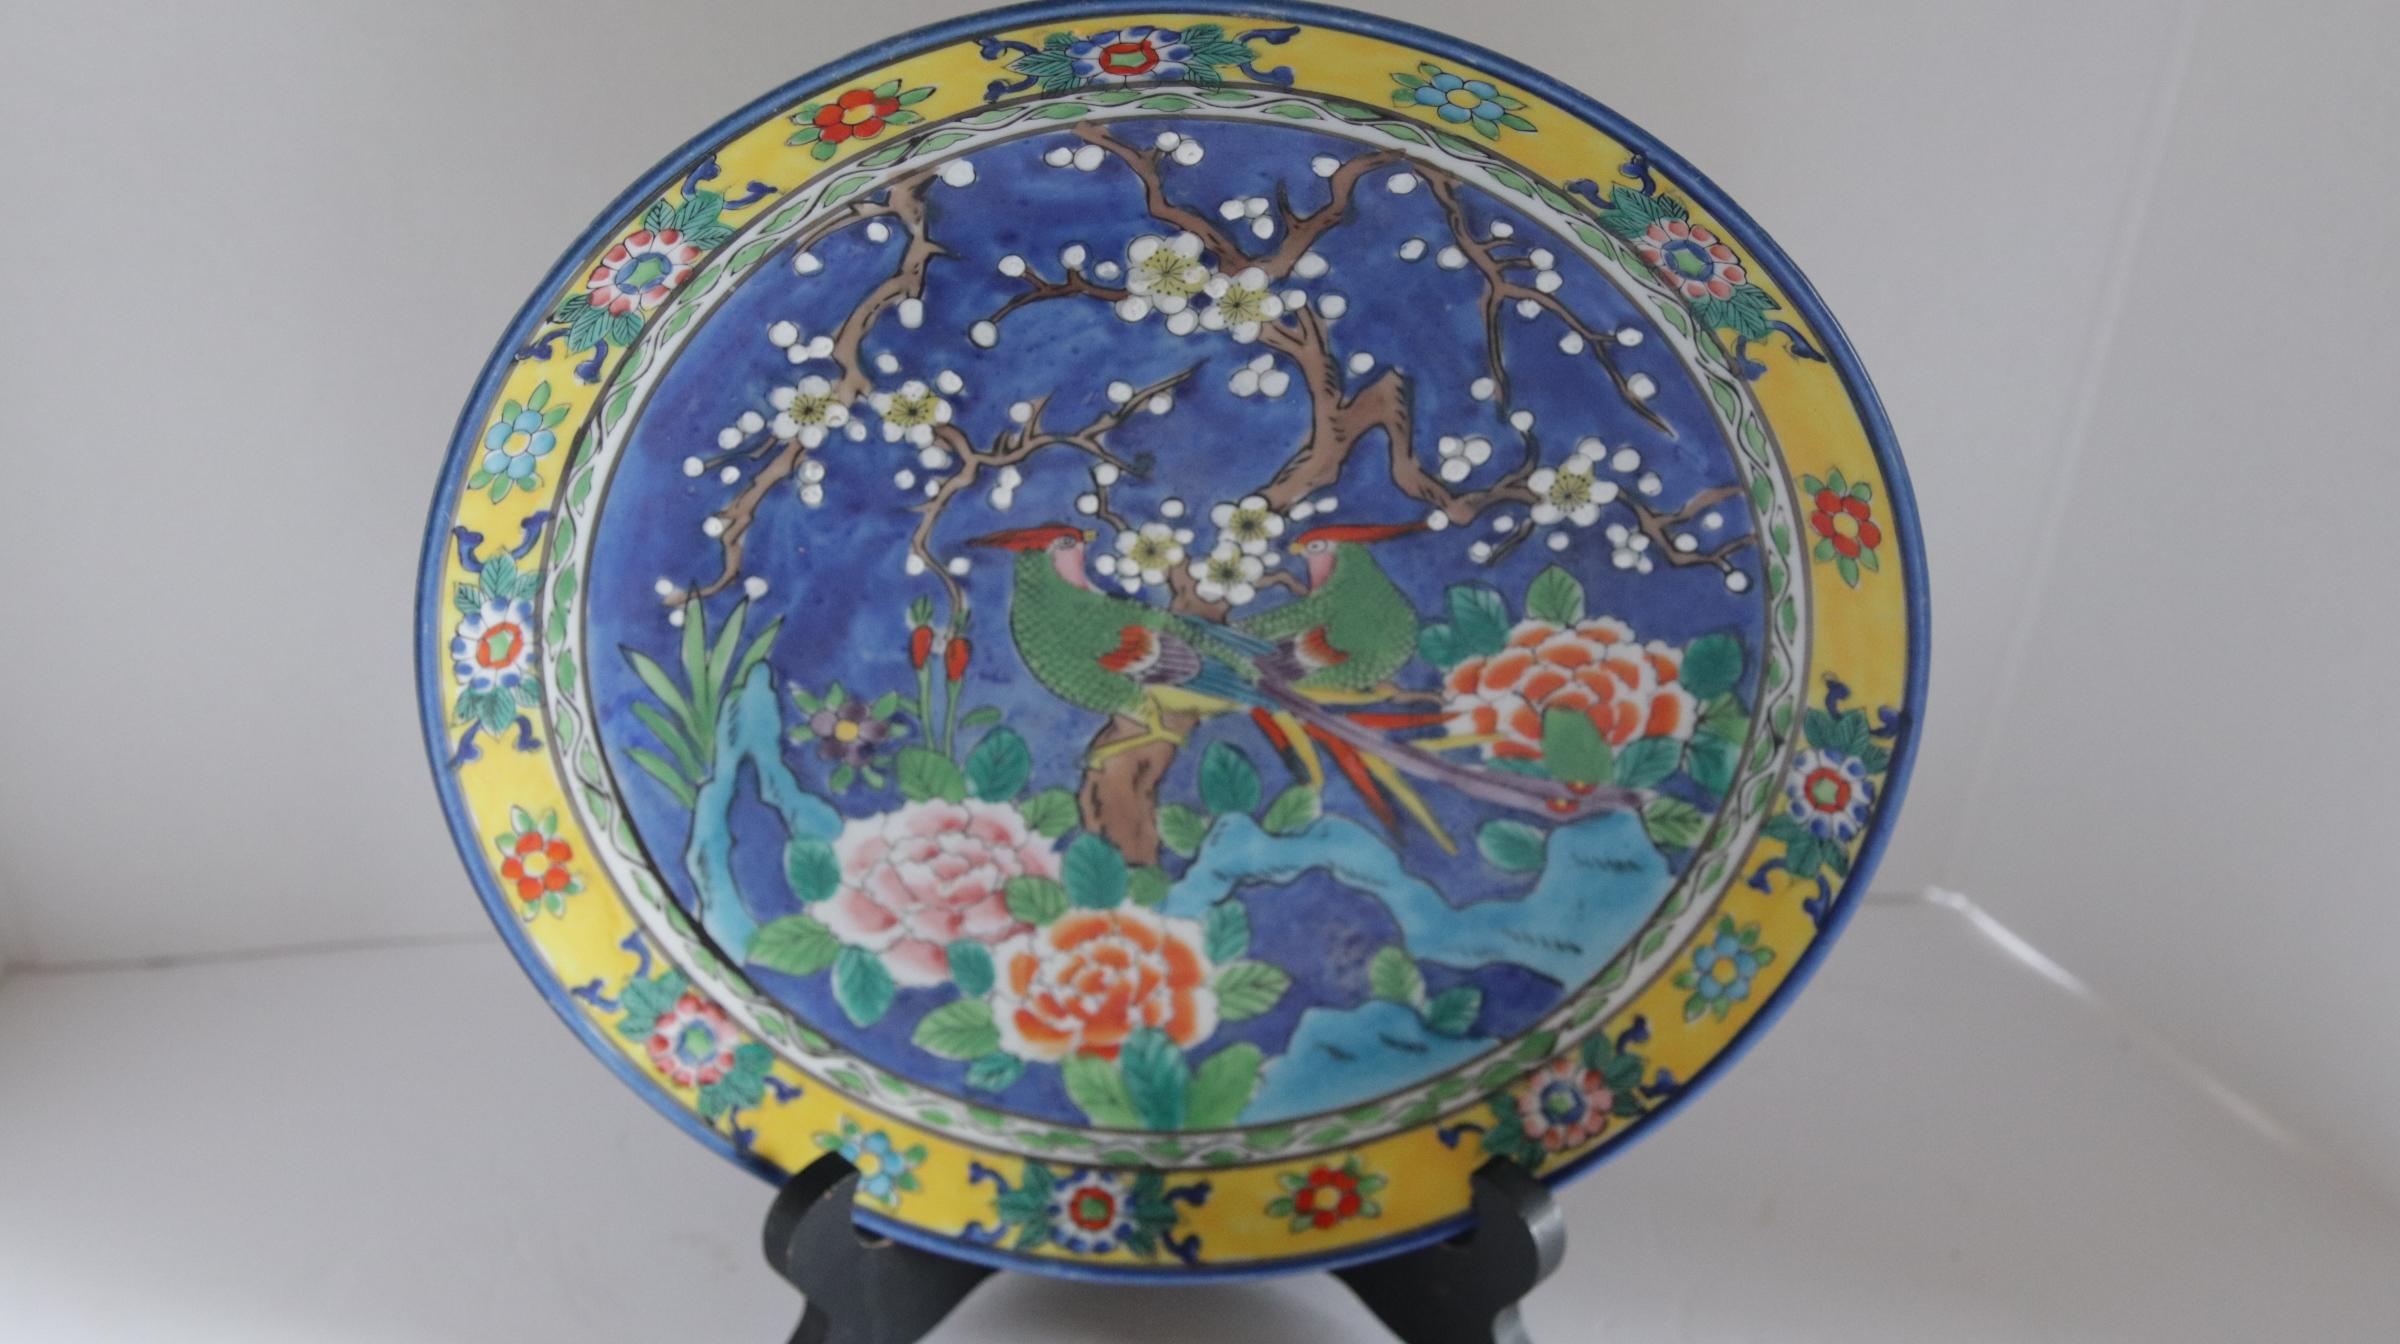 The turquoise and green touches in this famille rose plate with strokes of white and yellow make it irresistible. This fits into the Famille Rose Mandarin category. It reflects the delicate pastels that are generally associated with Chinese export